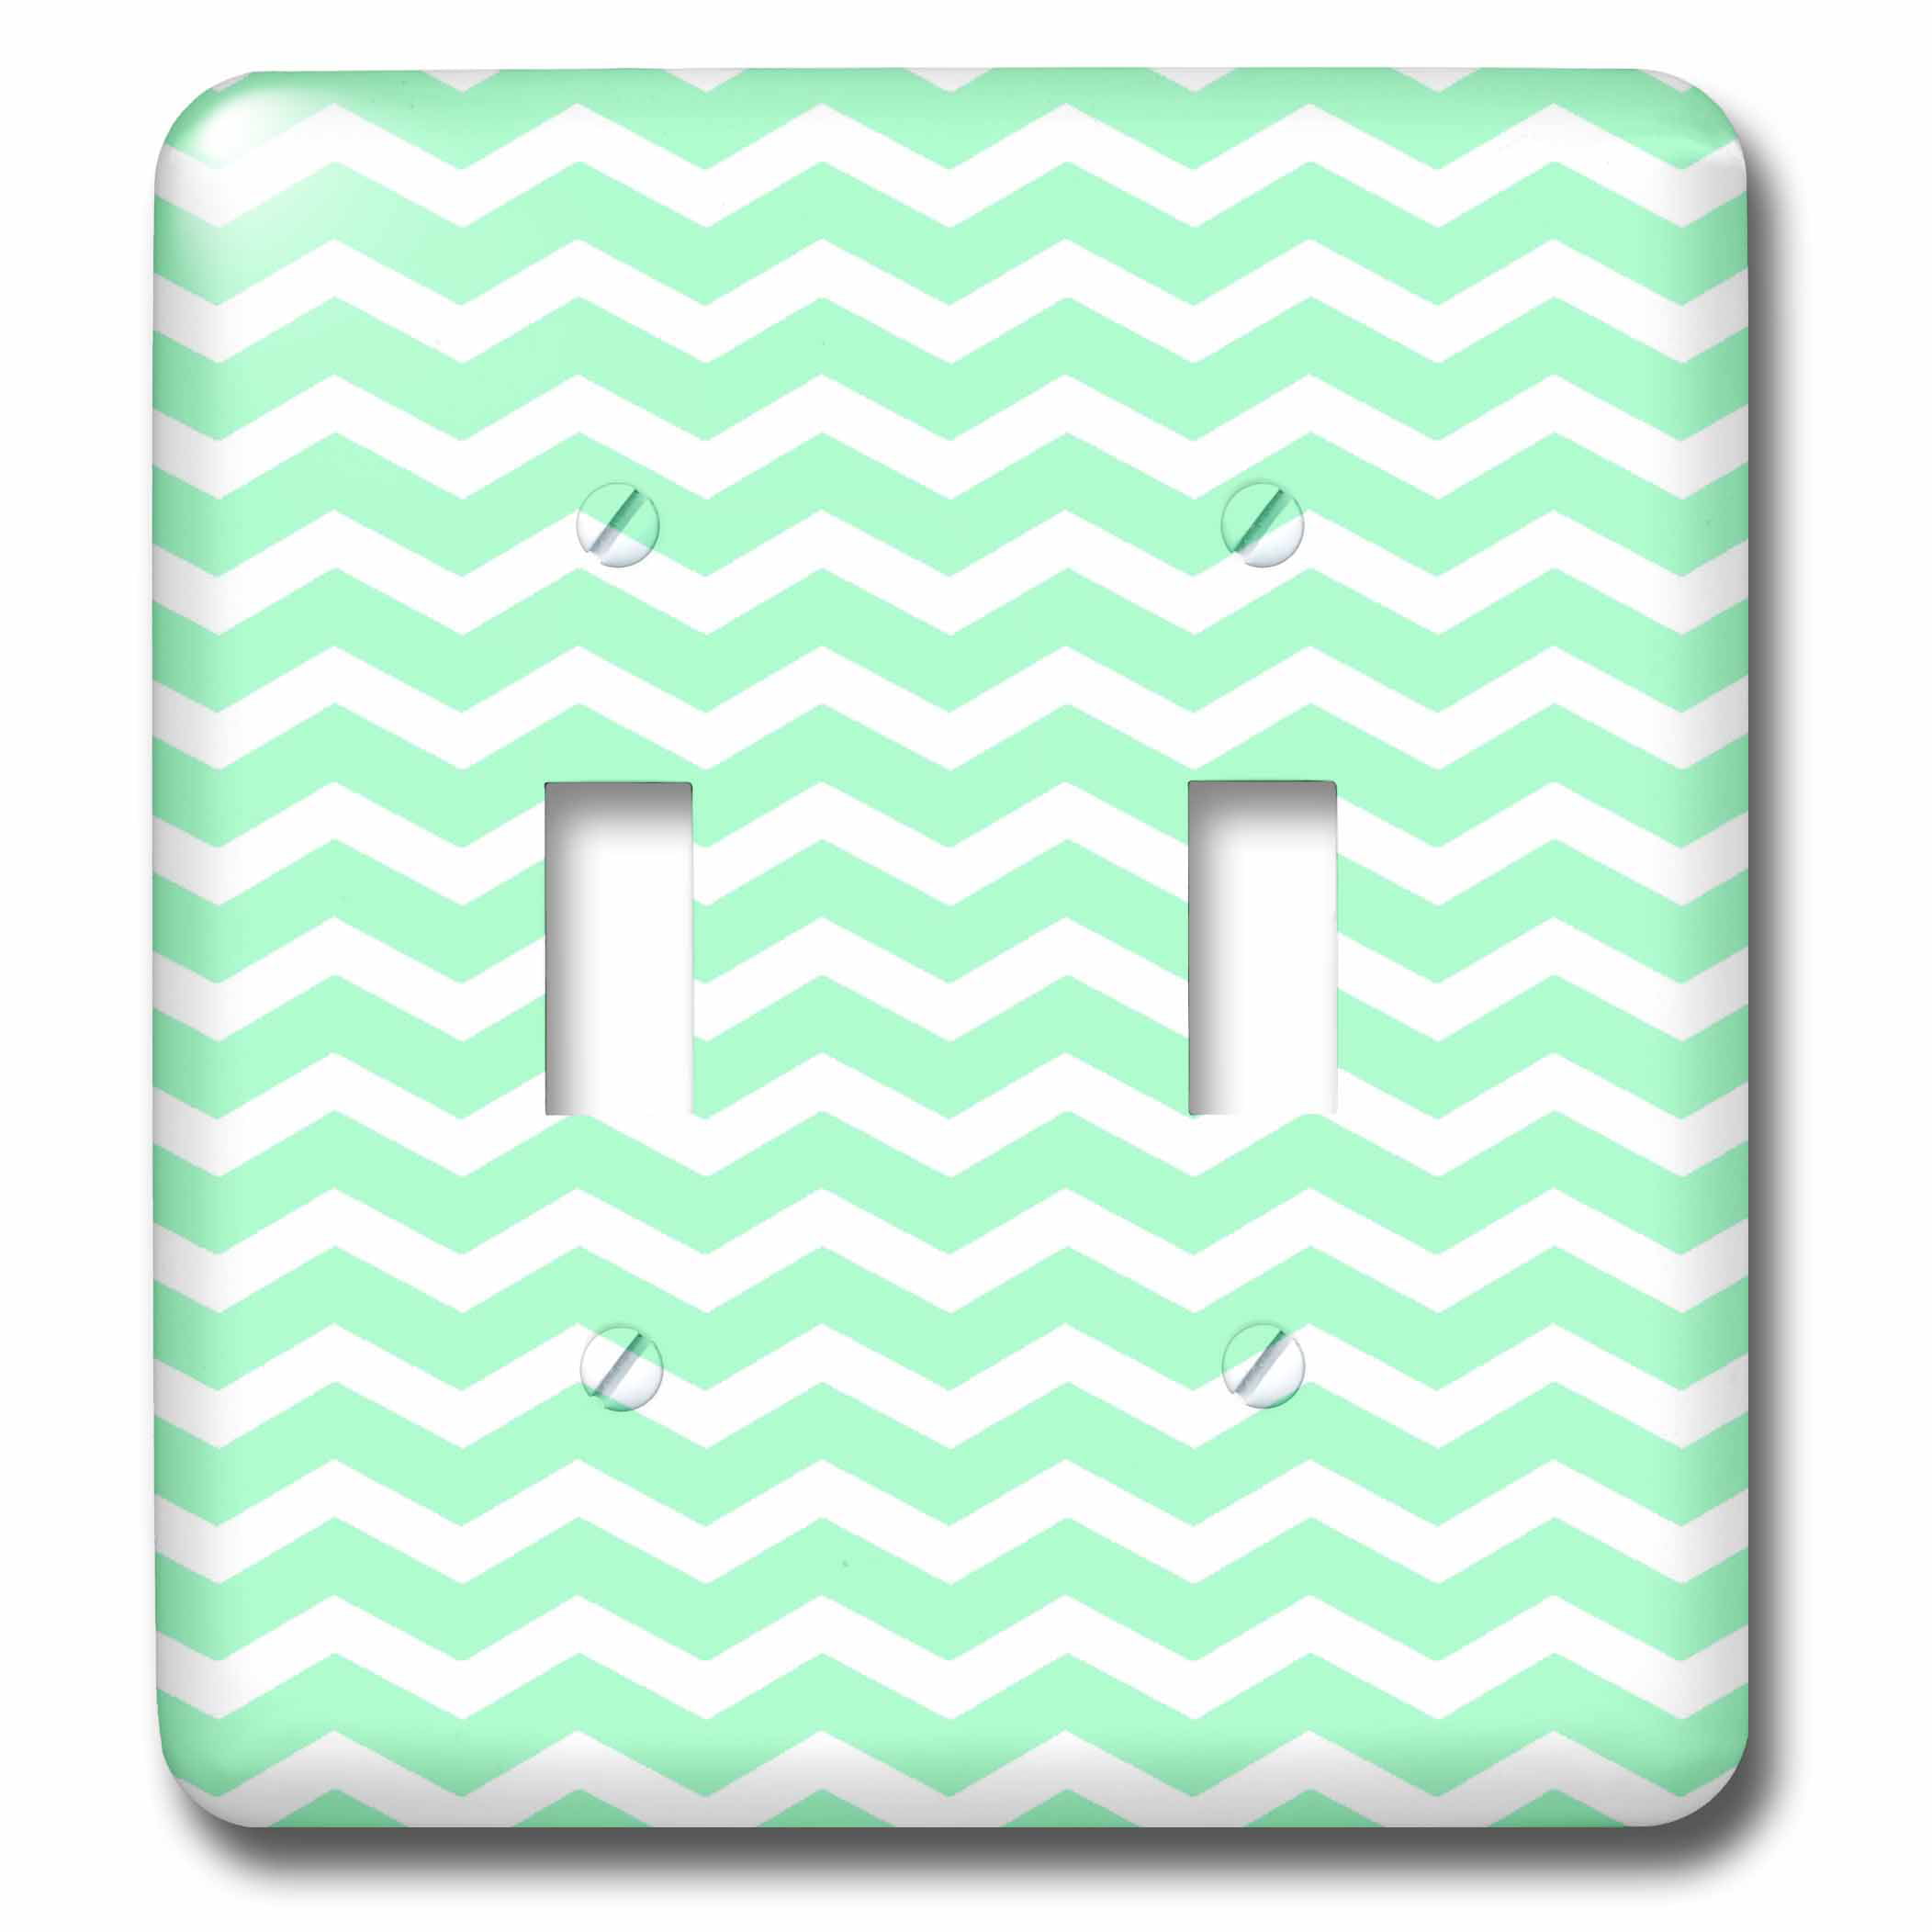 3dRose lsp_56647_2 Mint Green and White Chevron Zig Zag Stripes Pattern Retro and Stylish Double Toggle Switch 